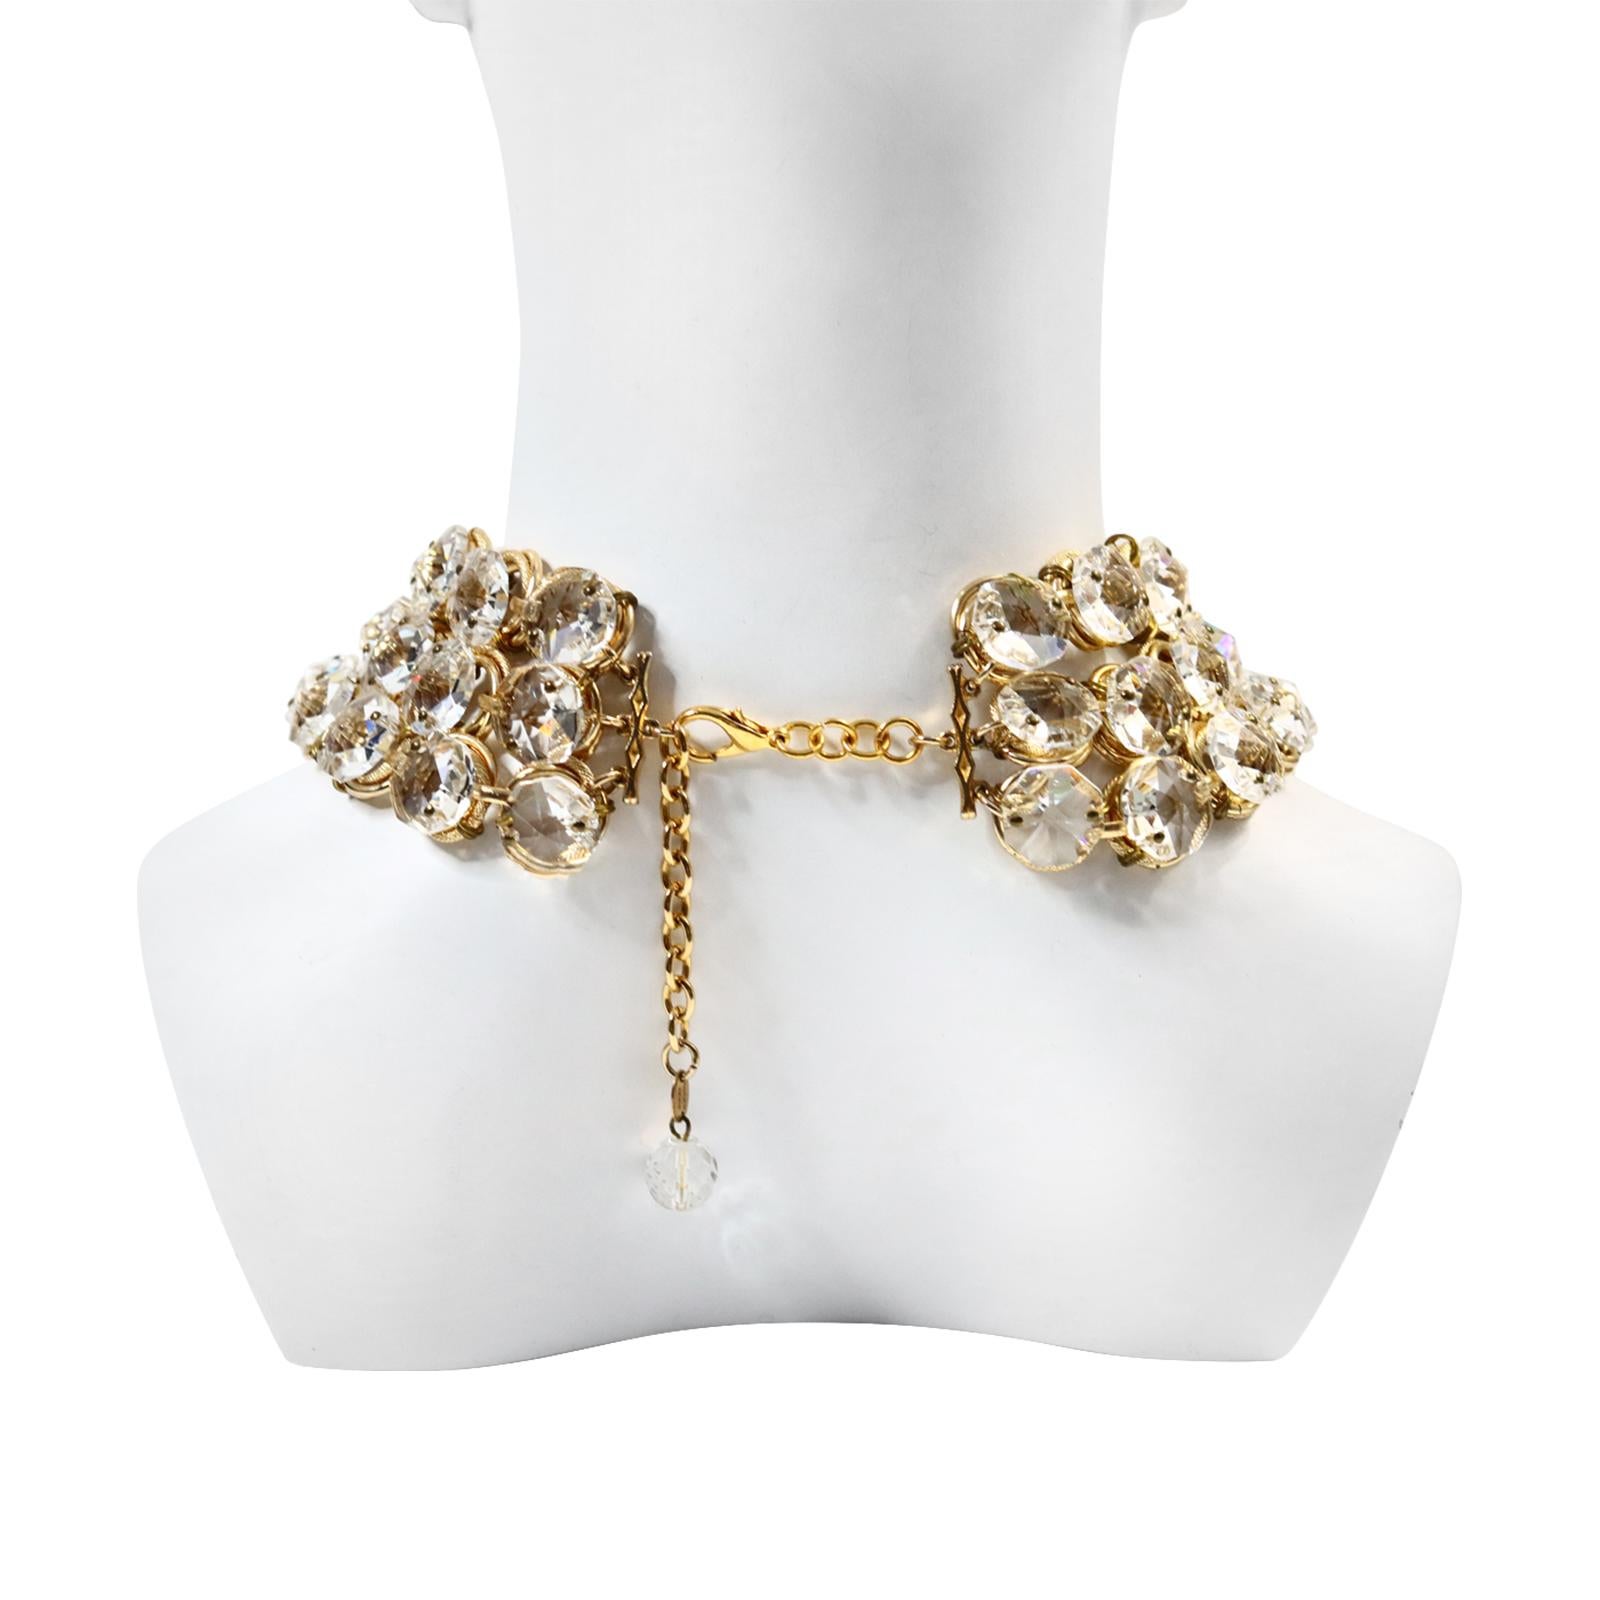 Vintage Poggi Paris Gold Tone with Large Crystals 3 Row Necklace, circa 1990s For Sale 1